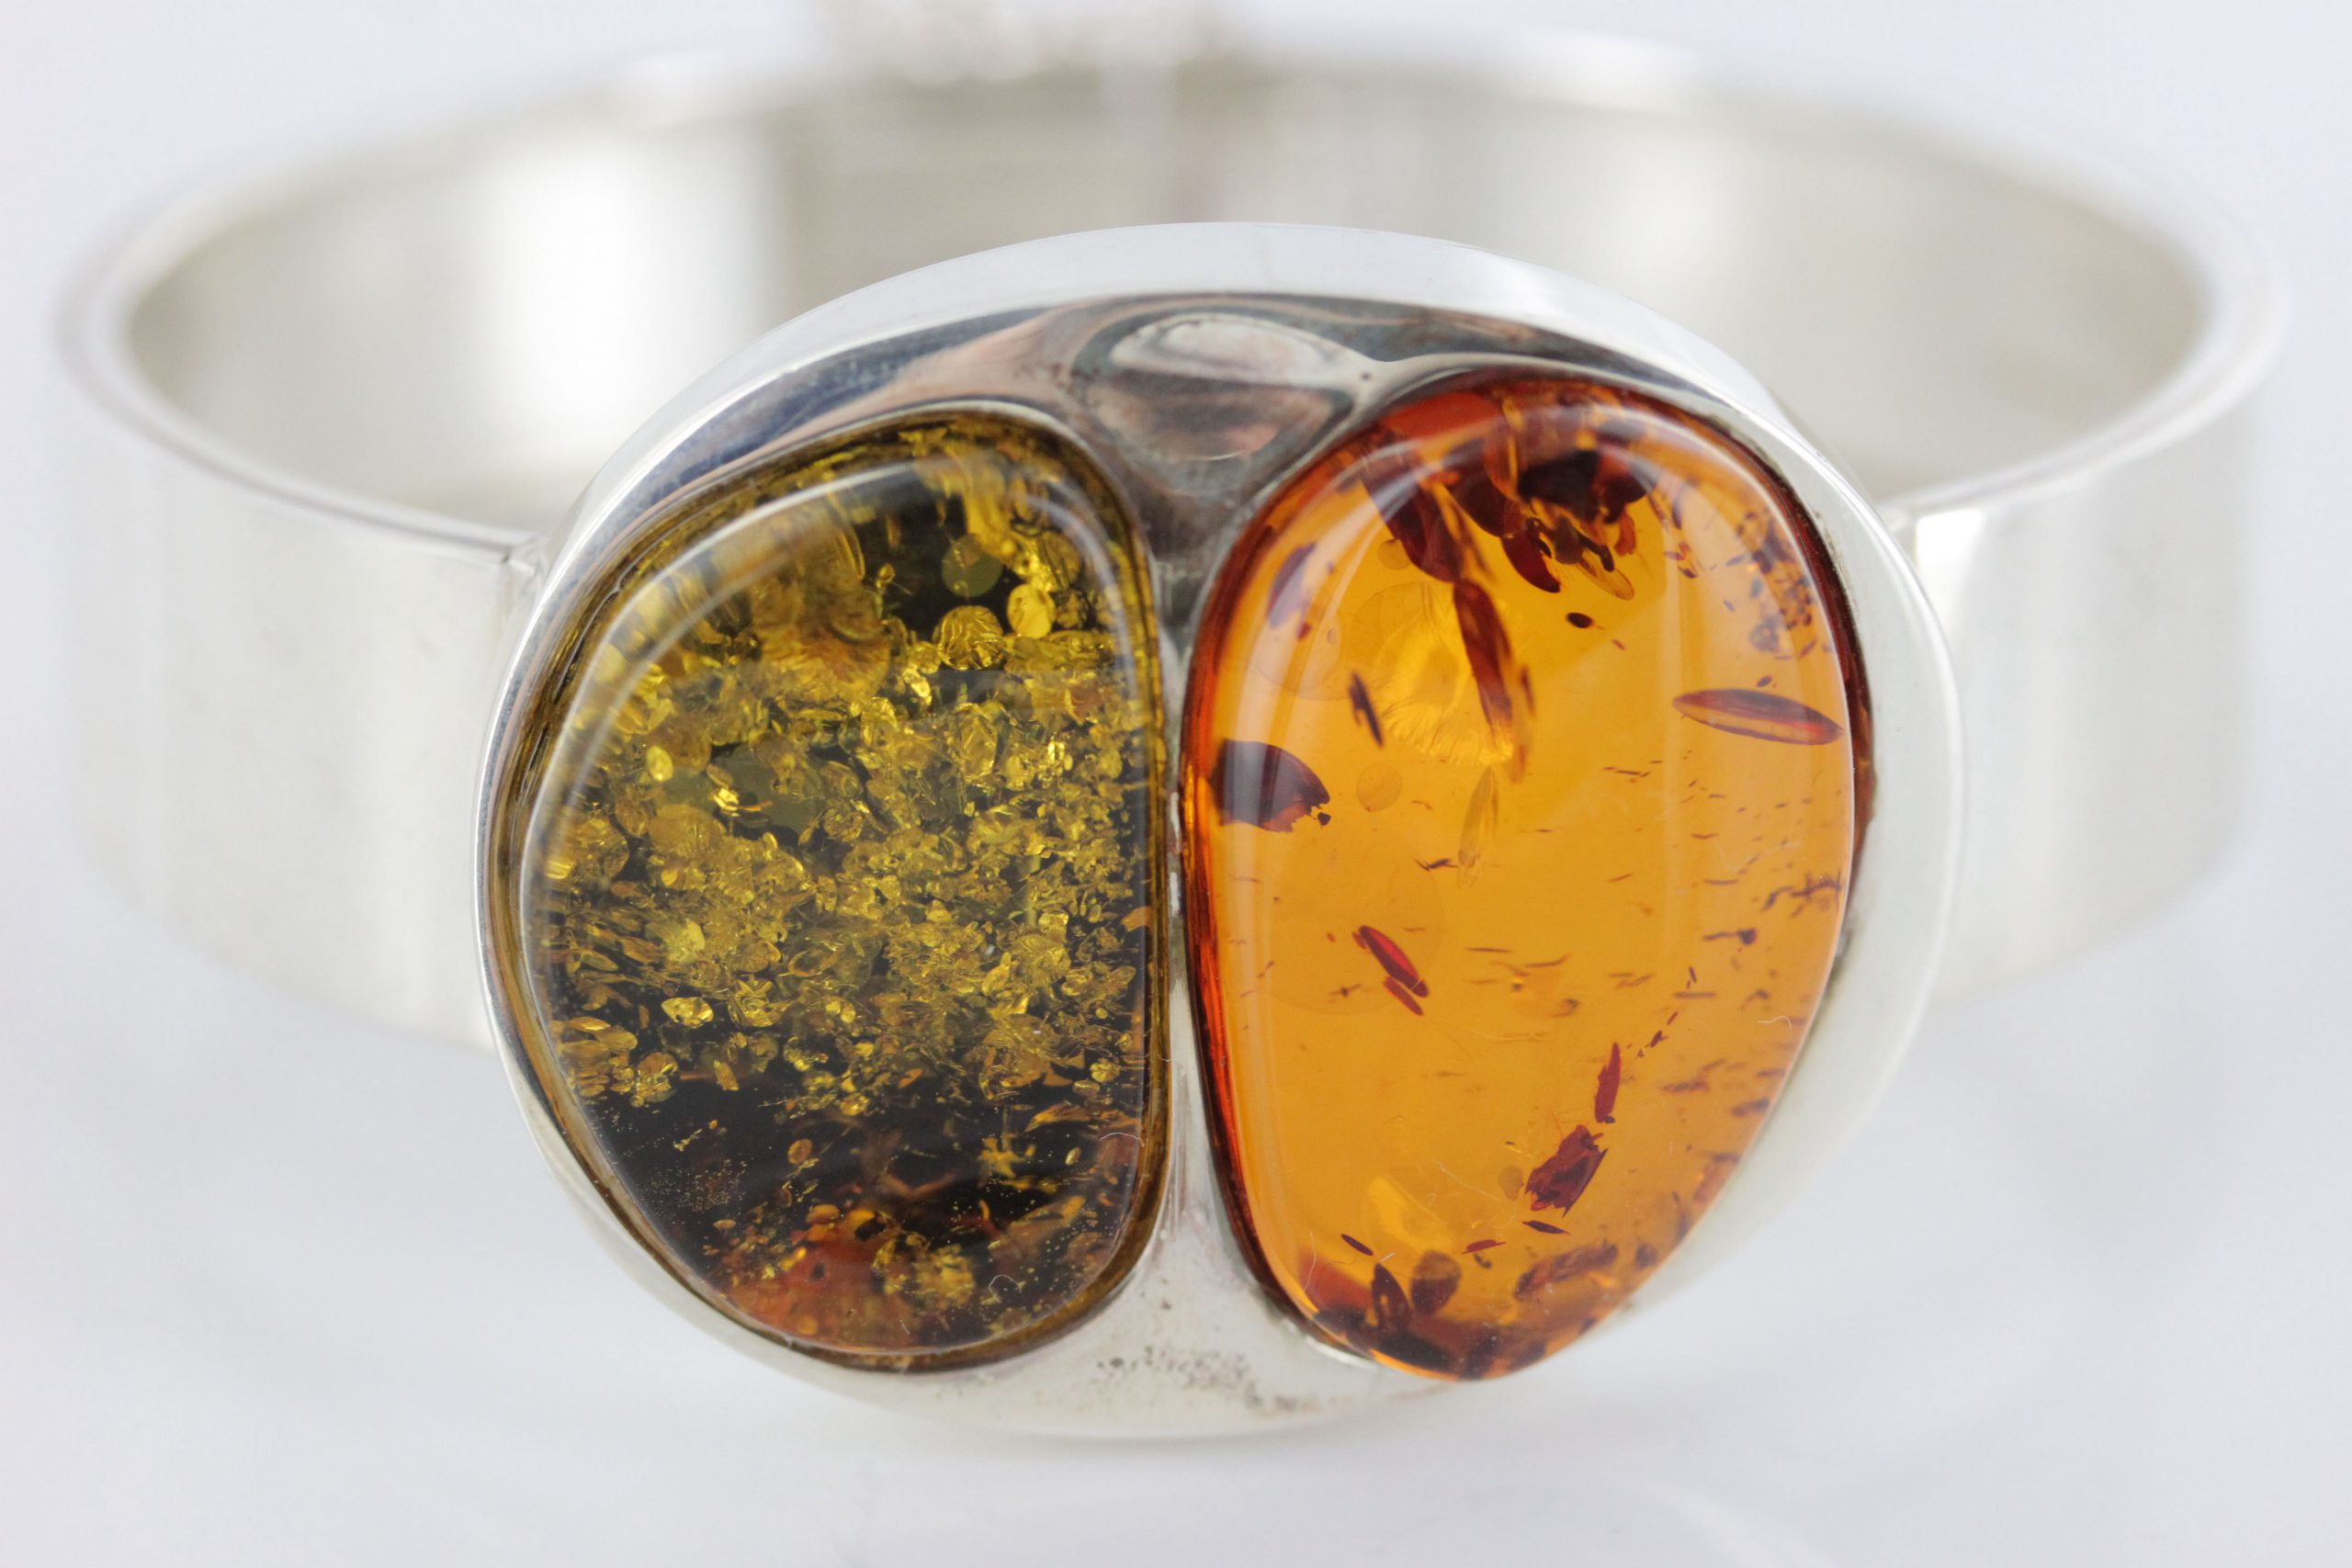 Amber Oval Ring 925 Sterling Silver Handmade Medium Authentic Dominican Rare Amber